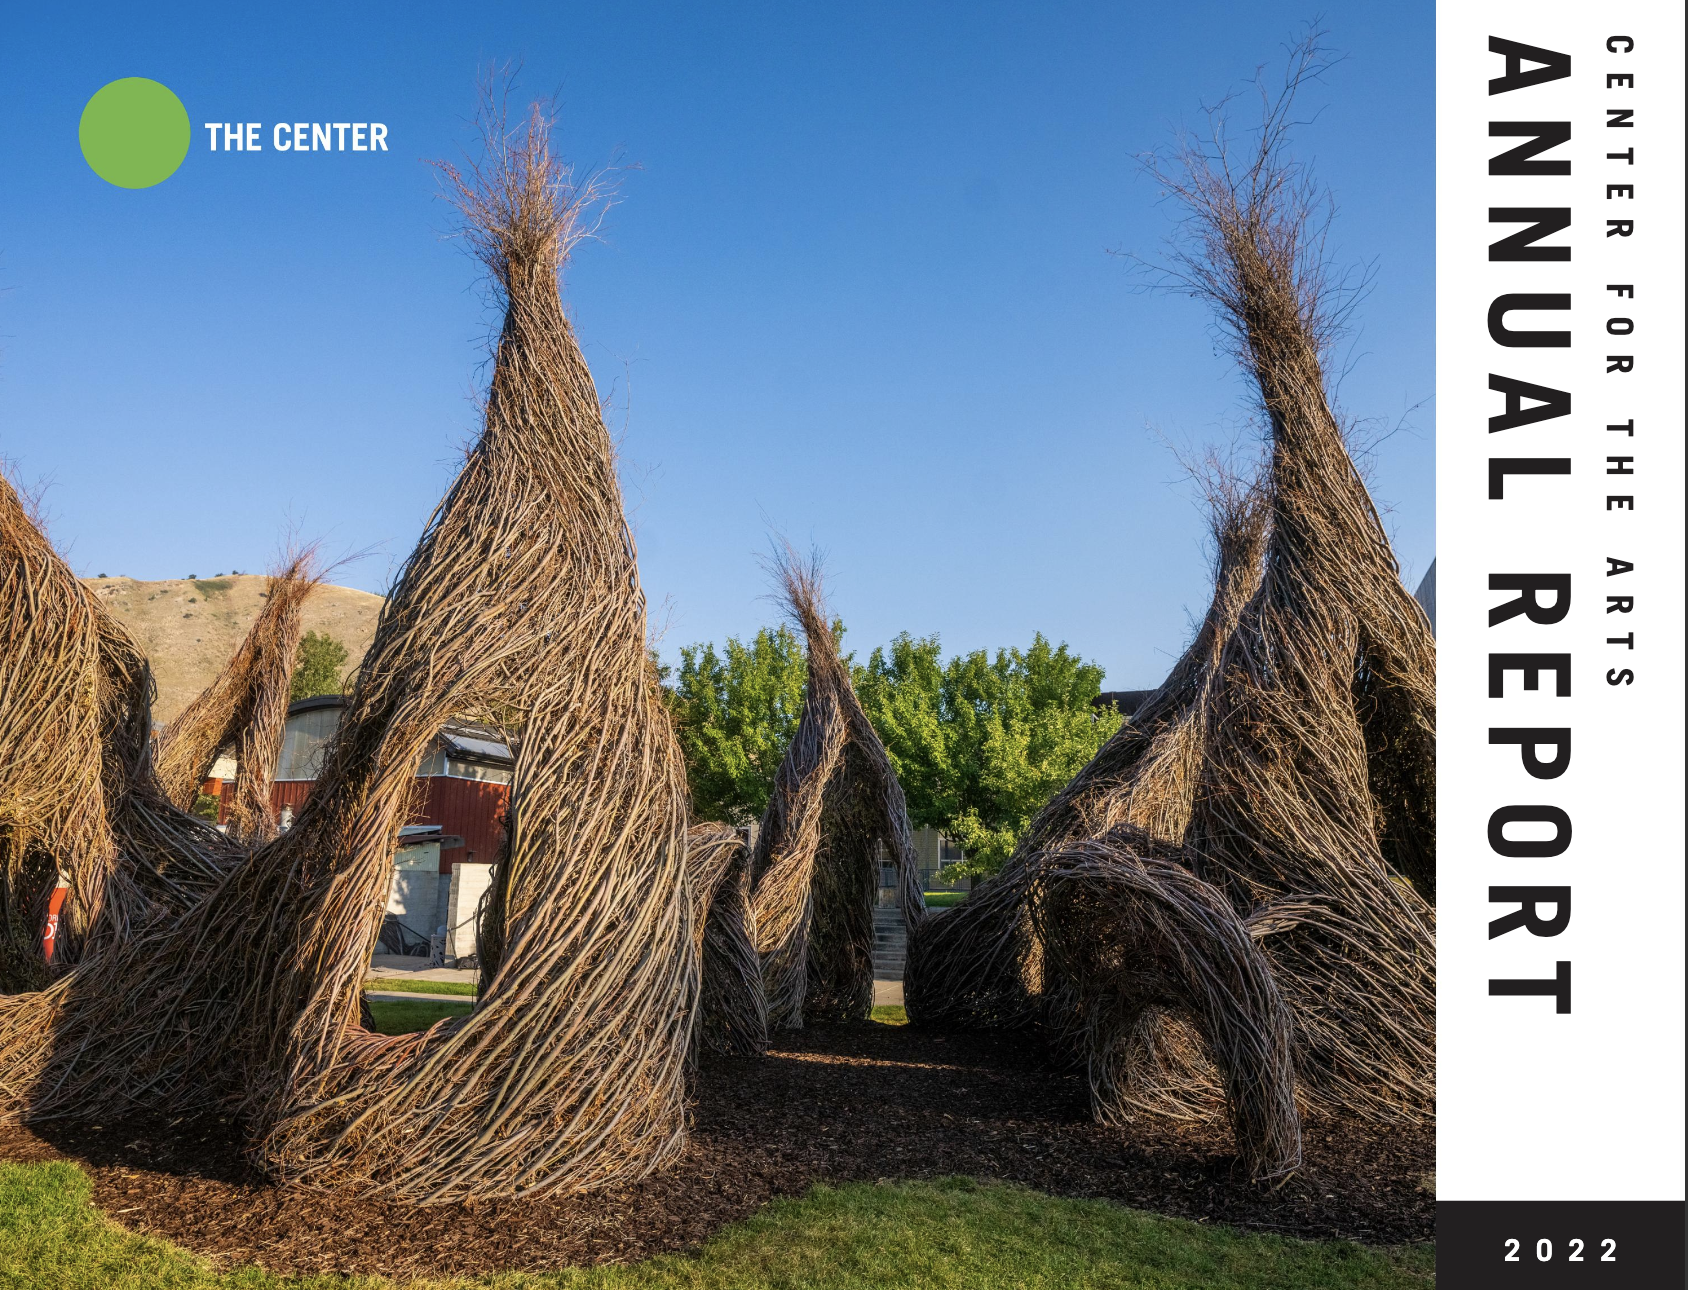 cover of the Center for The arts Annual Report 2022 showing sculptures made from sticks and branches